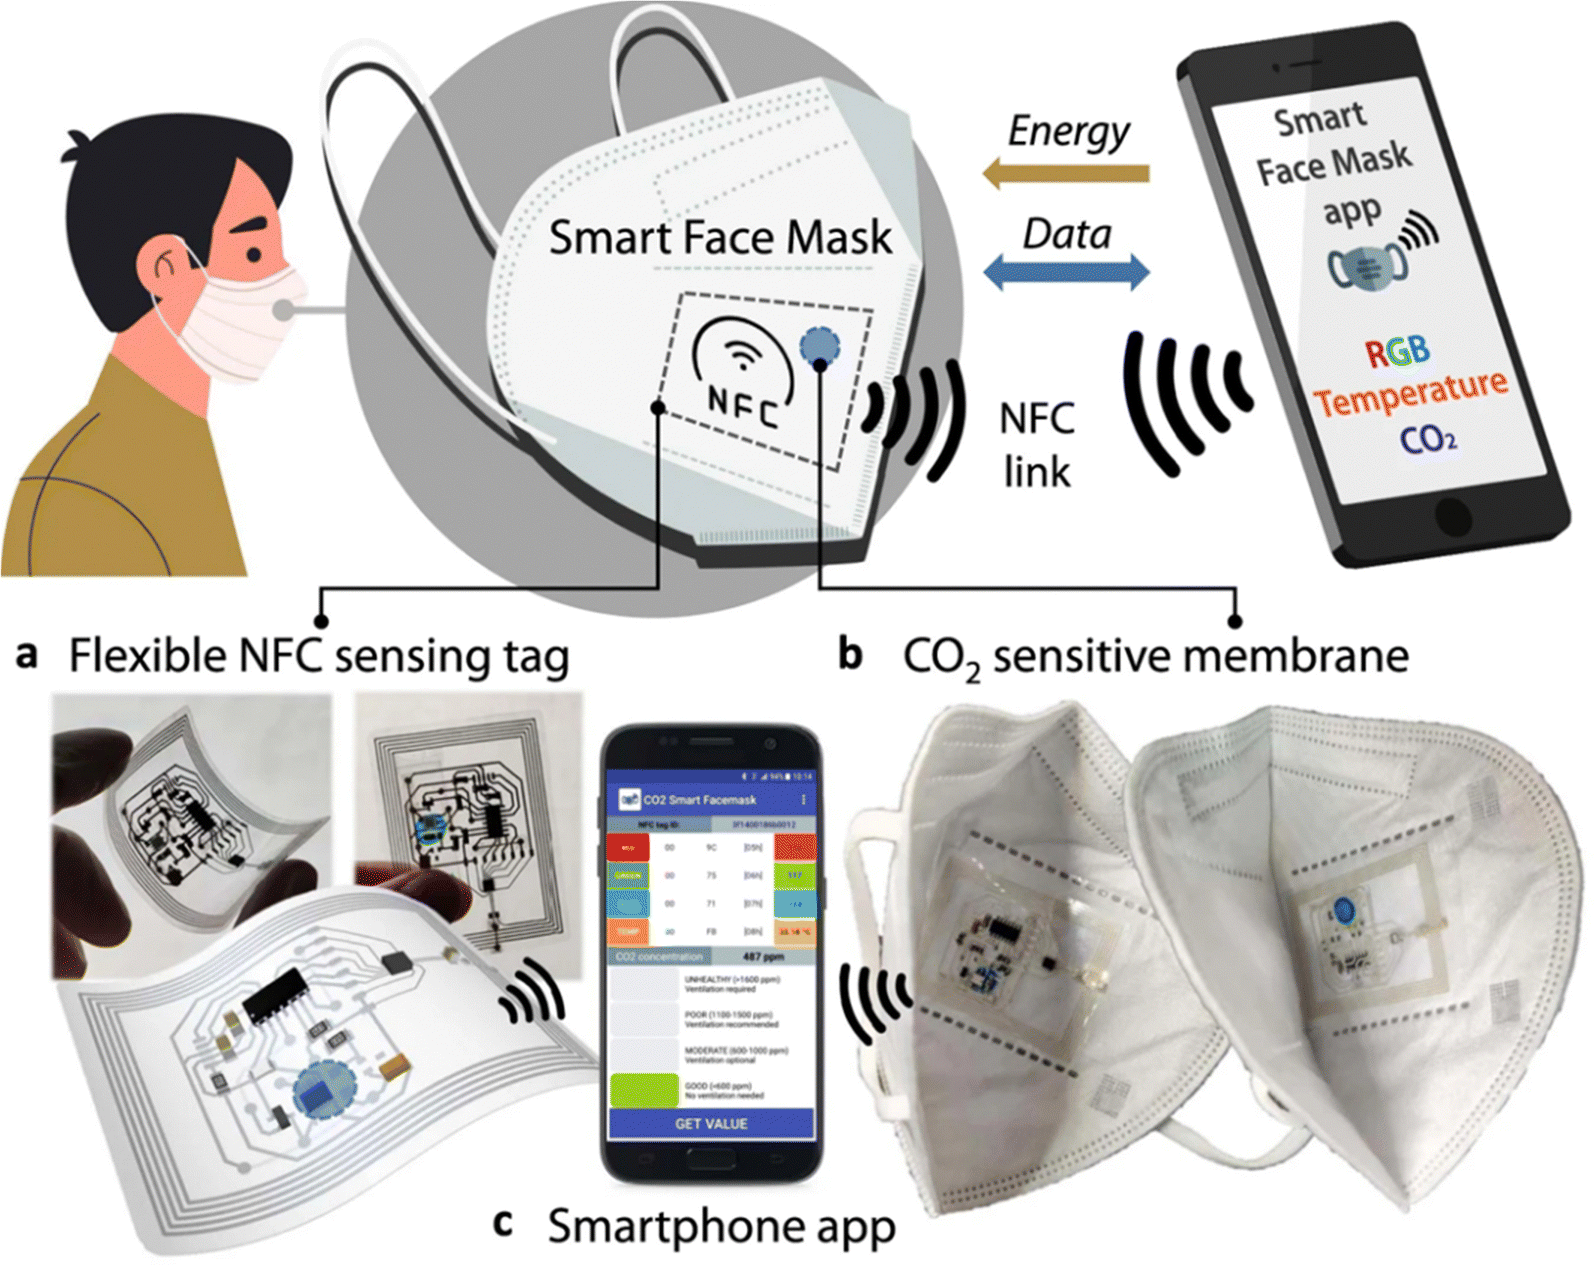 Examples of types of wearable devices, a accessories, and b implantable